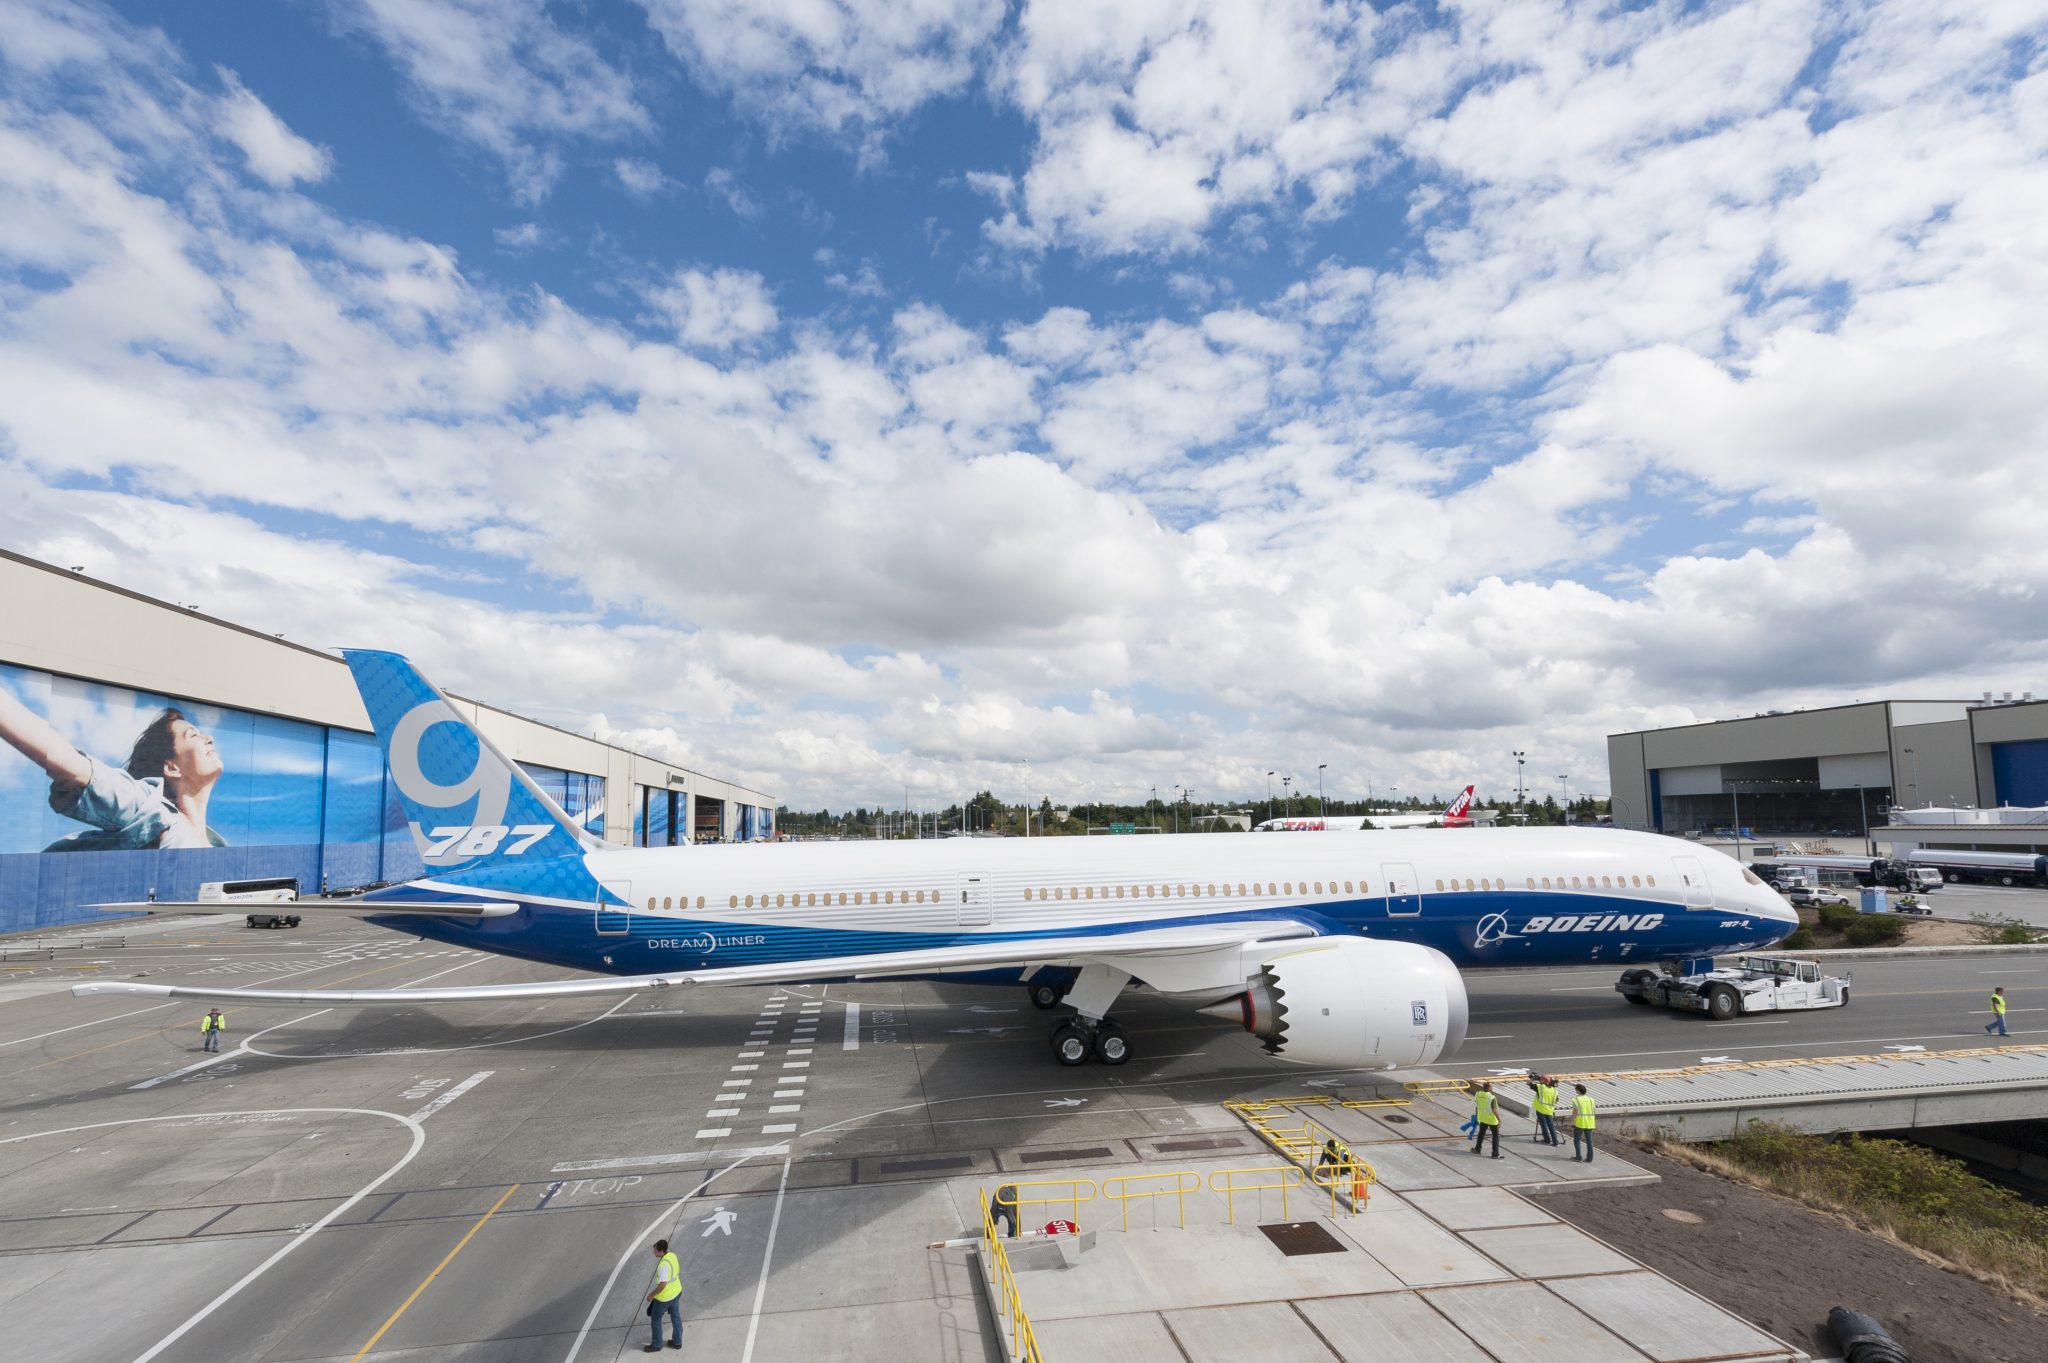 BOC Aviation orders four 787-9 aircraft